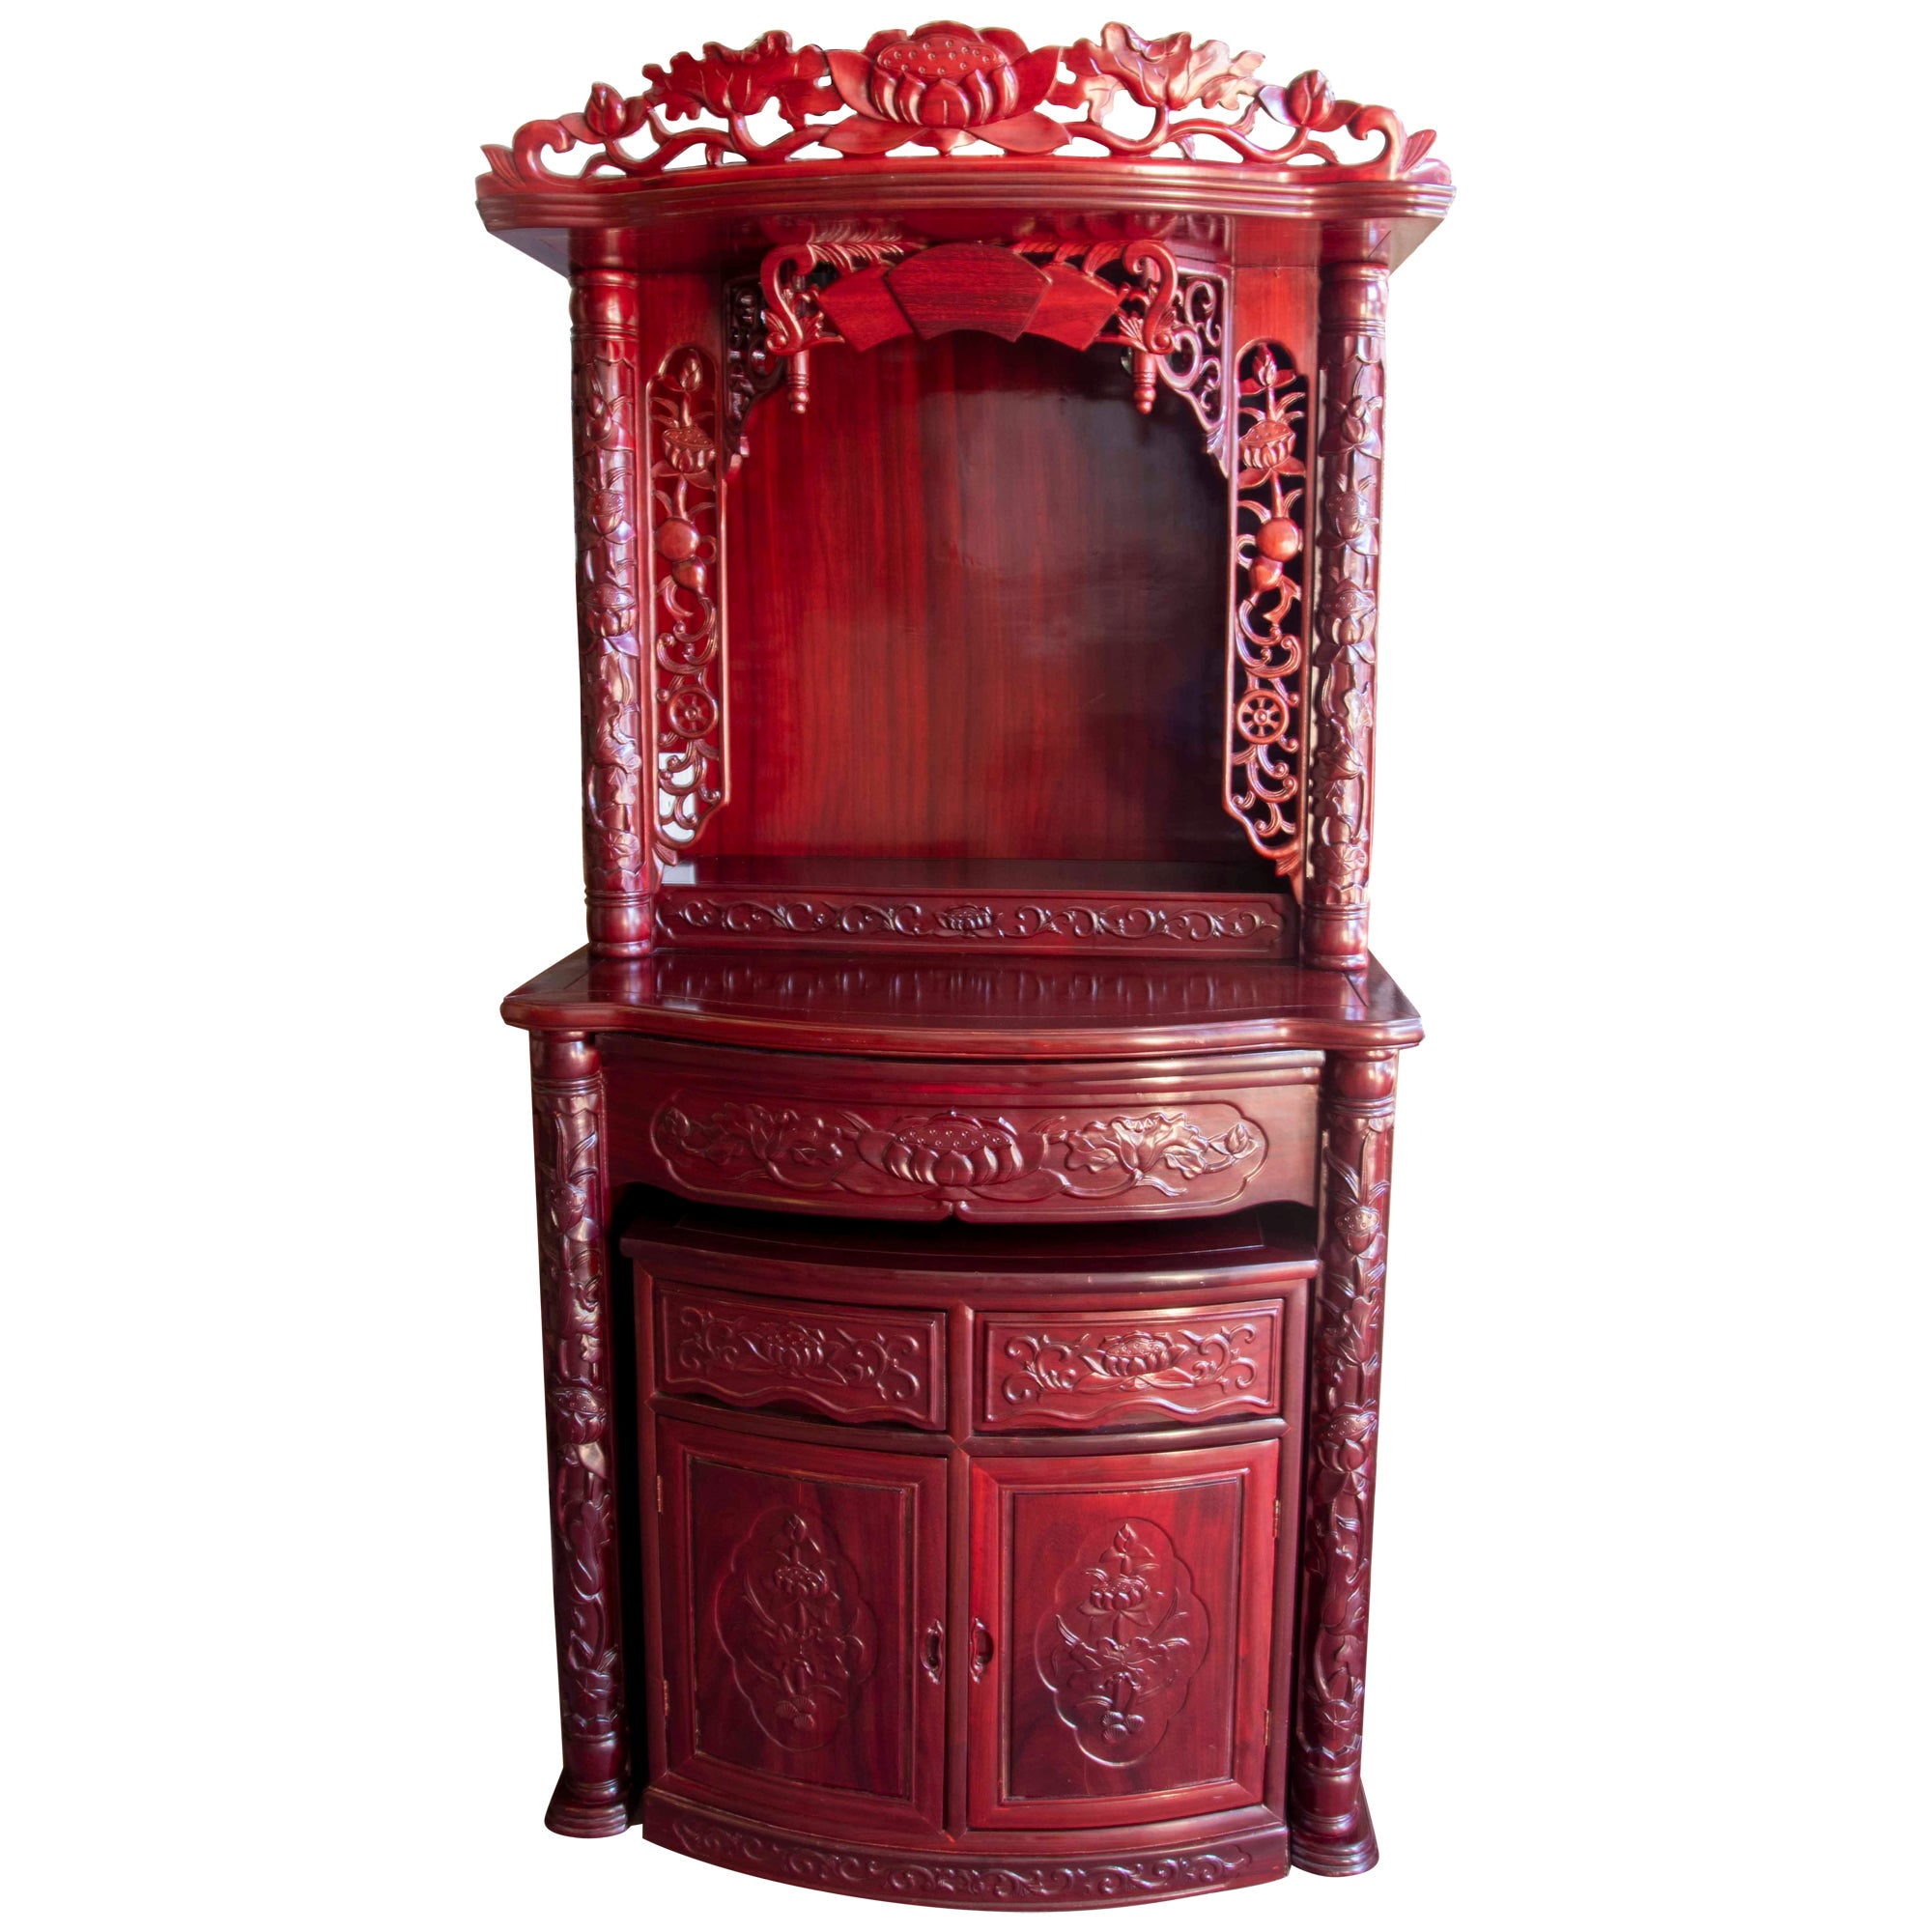 Chinese Hand-Carved Altar of Mahogany Wood and Lower Part with Doors and Drawers